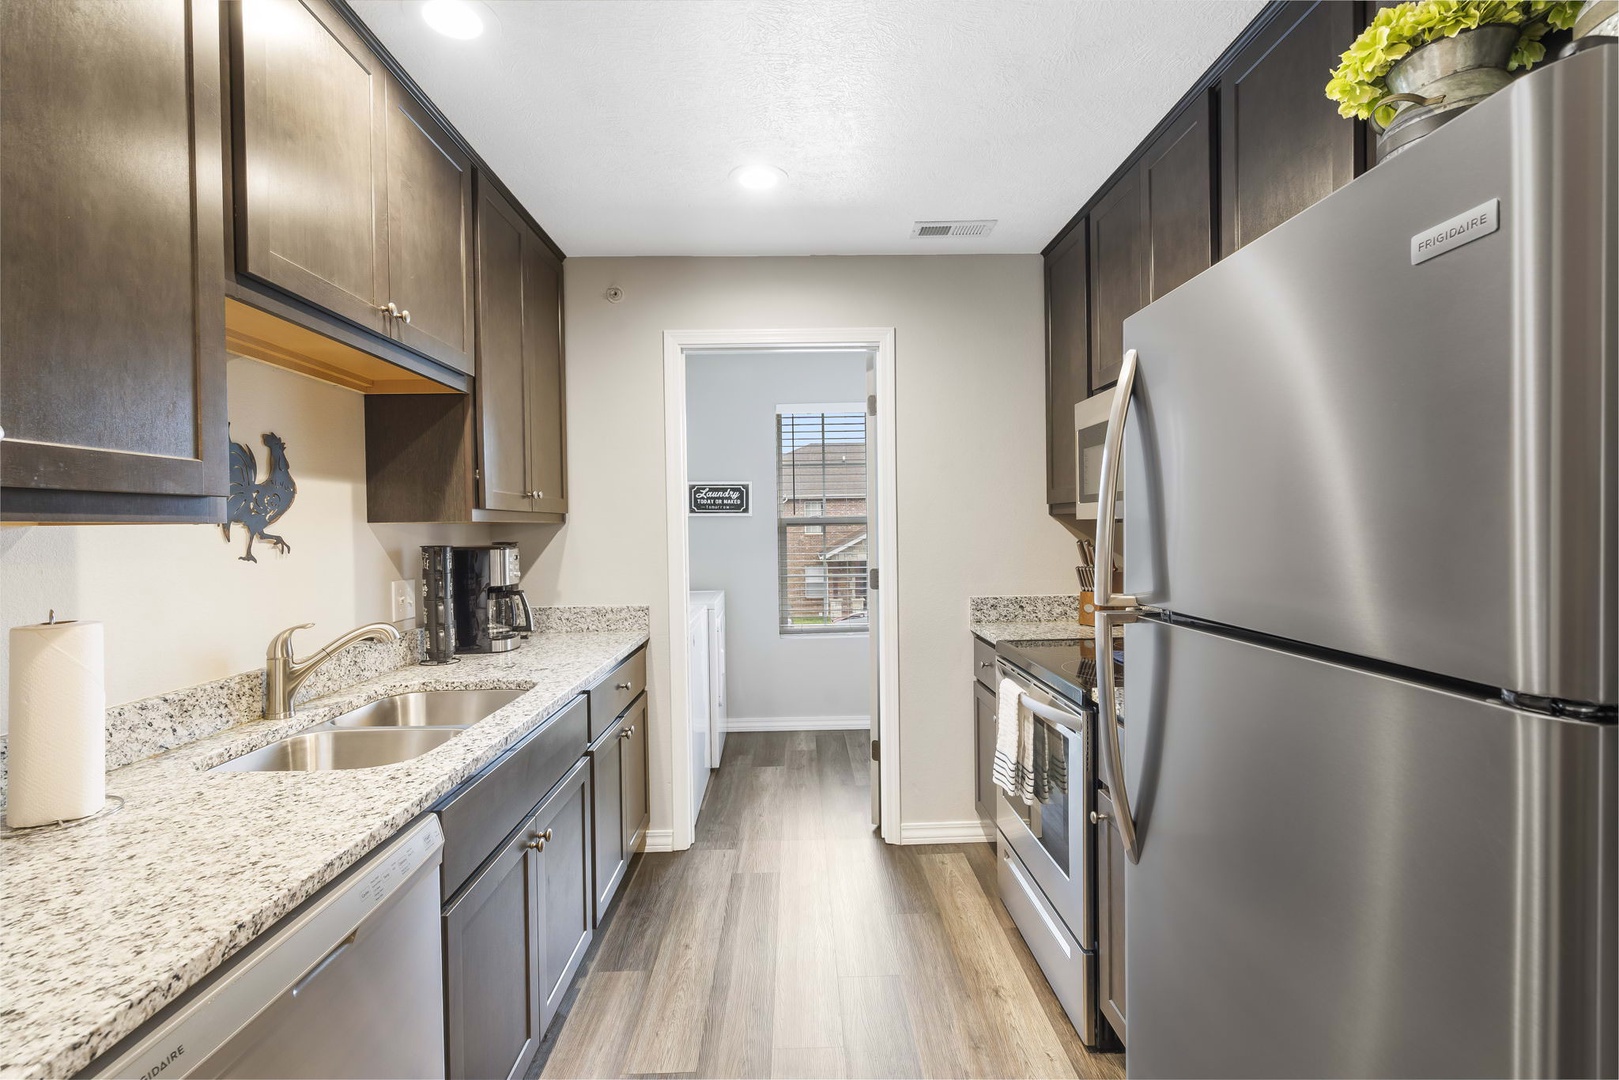 Full kitchen with stainless steel appliances (Unit #3)